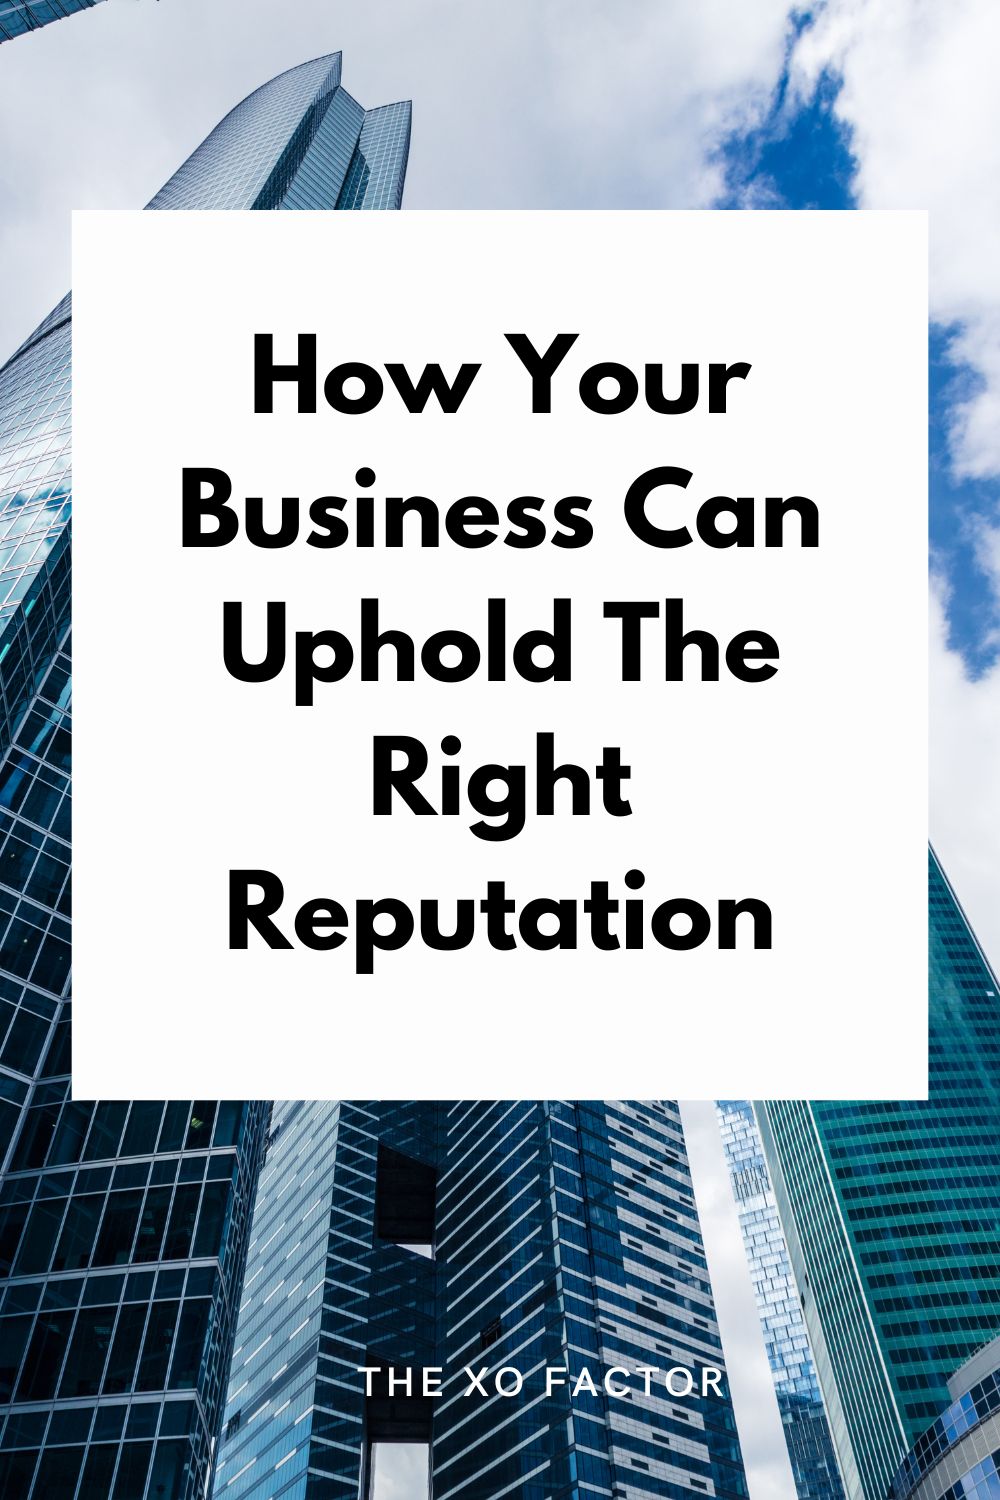 5 Ways To Ensure Your Business Upholds The Right Reputation